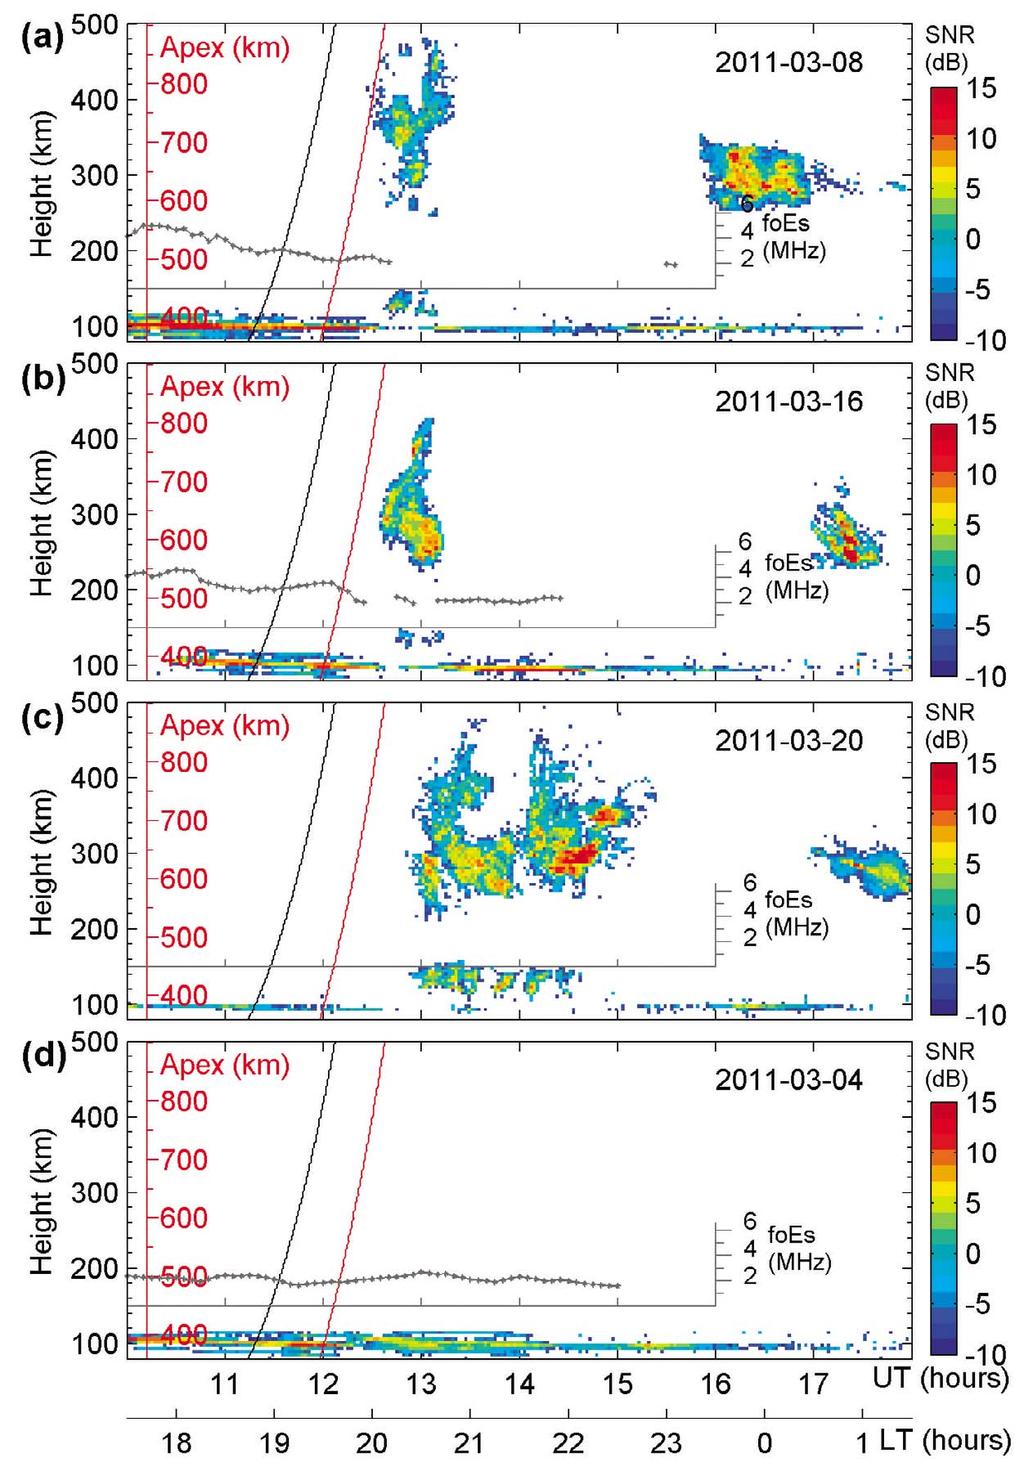 Figure 1. Height time intensity (HTI) maps of backscatter echoes detected by the Sanya VHF radar on (a) 8 March 2011, (b) 16 March 2011, (c) 20 March 2011, and (d) 4 March 2011.